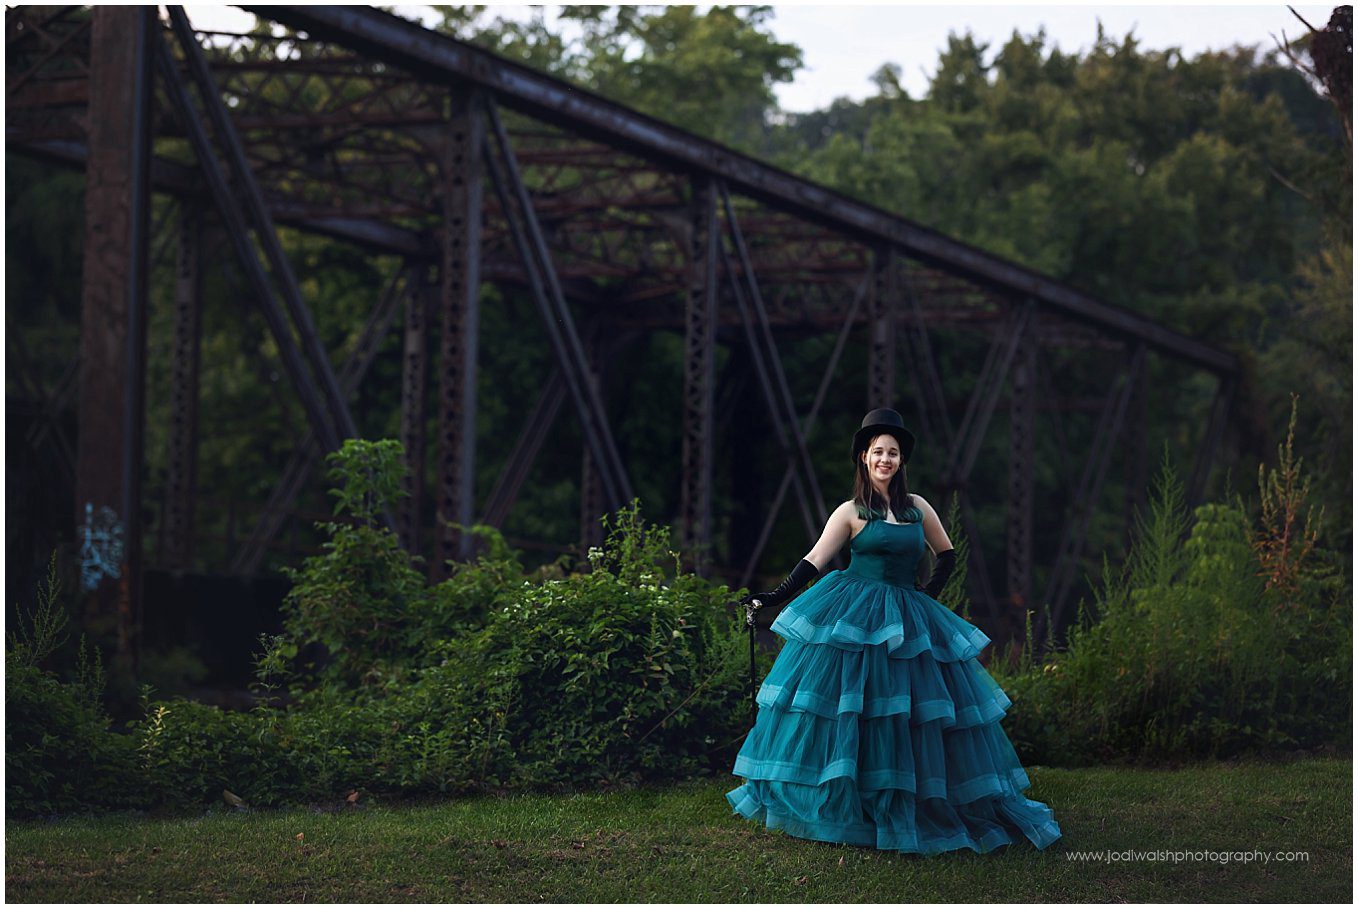 image of a teen girl wearing a teal gown with black gloves and a top hat.  She's standing in front of a rusted train trestle that's overgrown with trees and vines.